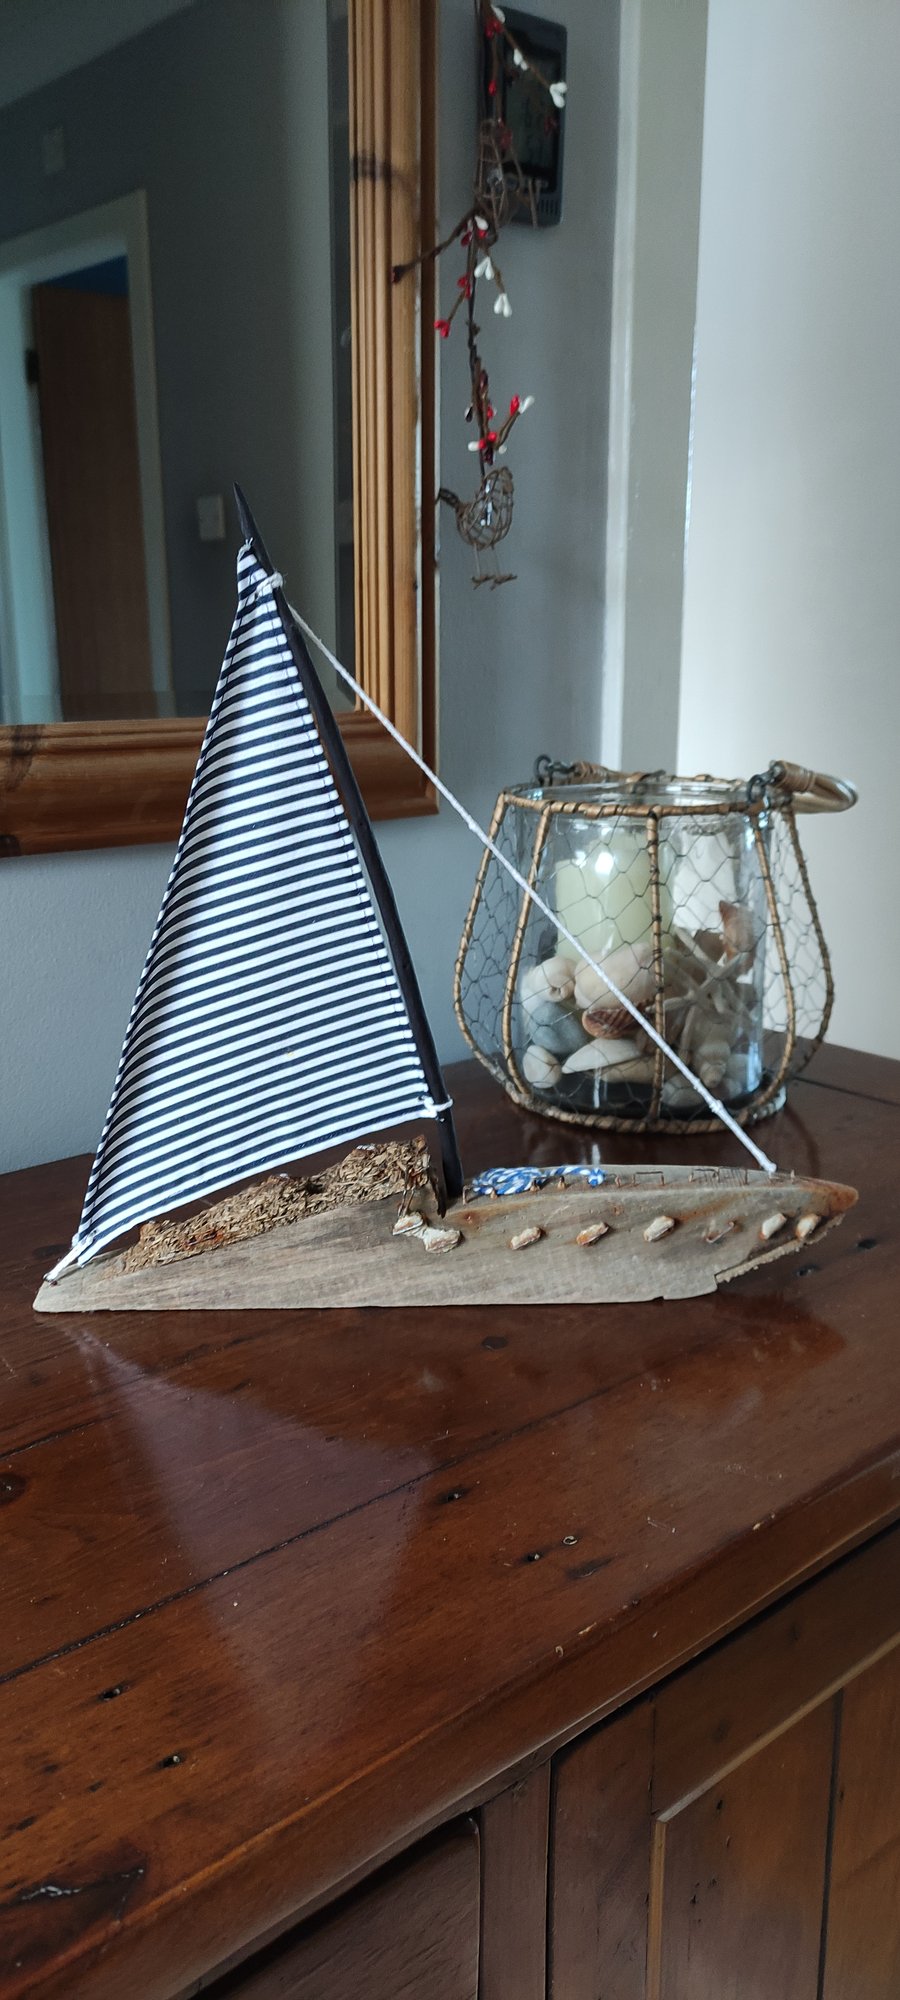 Driftwood sailboat - wall decoration with hanger